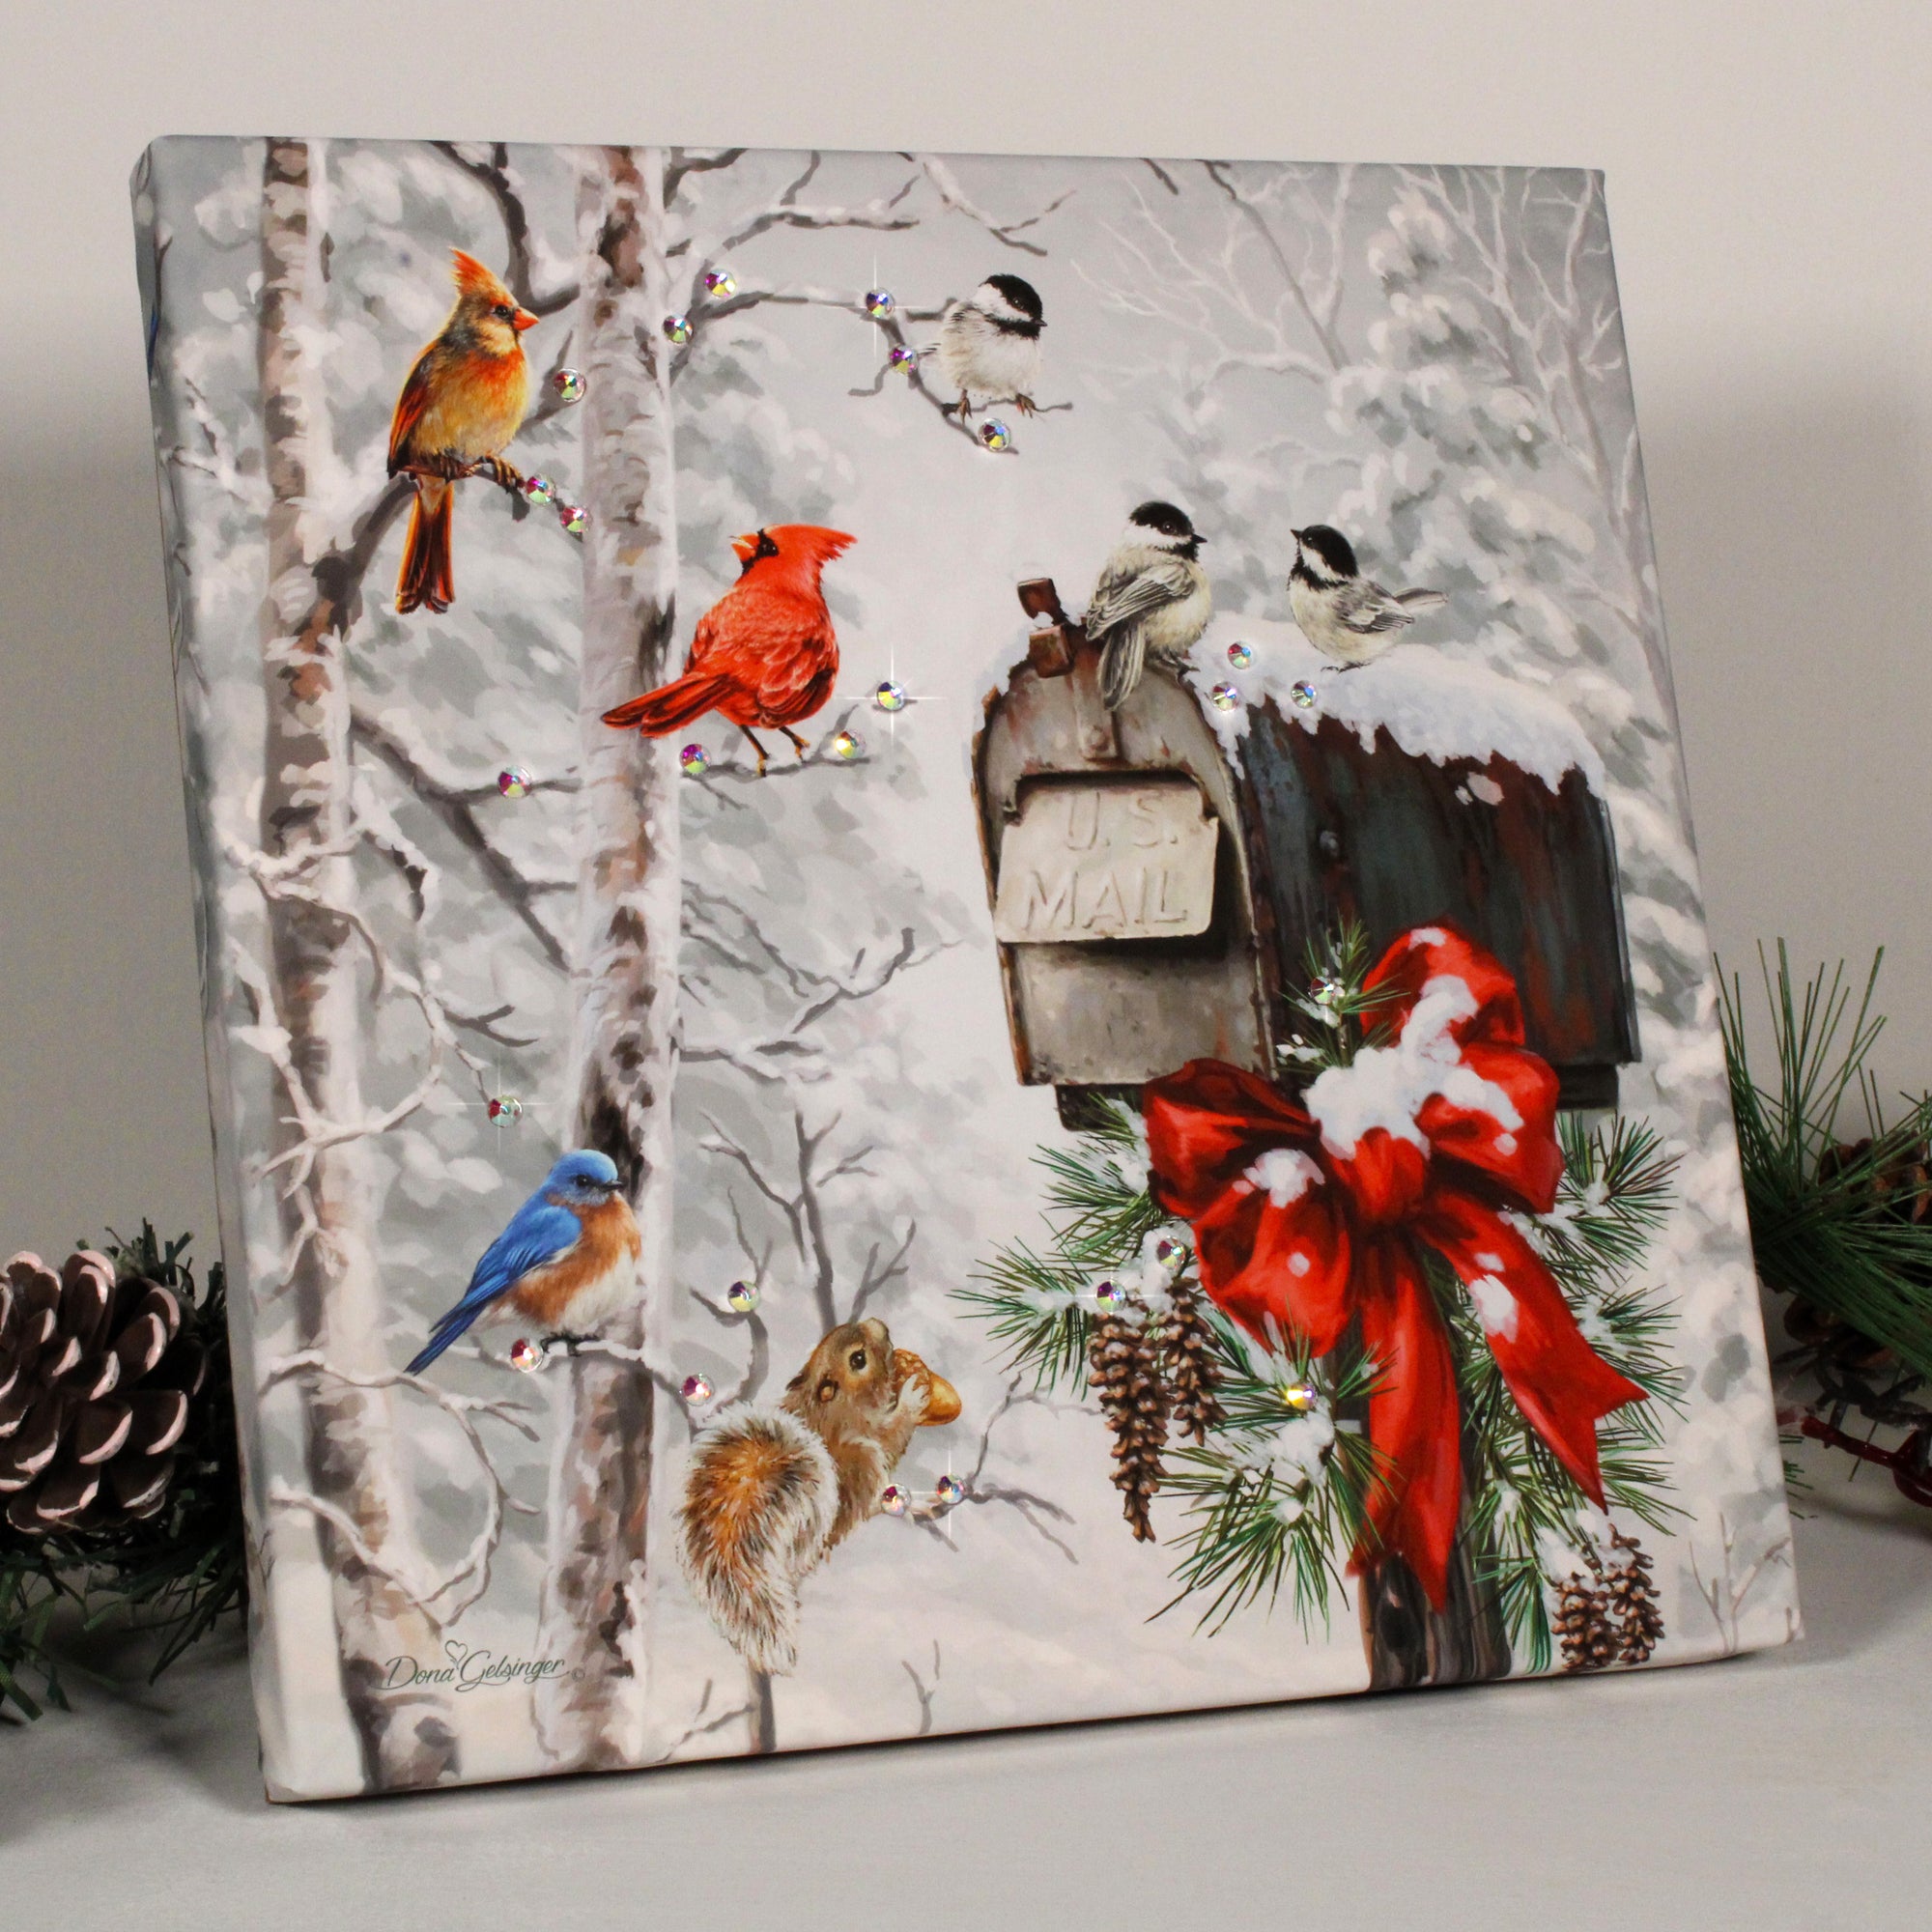 Featuring an enchanting winter scene with a charming mailbox nestled among a flurry of snow, this exquisite print captures the essence of the season. With a delightful cast of feathered friends, as well as a playful squirrel clutching a peanut, it's a scene that truly comes to life.